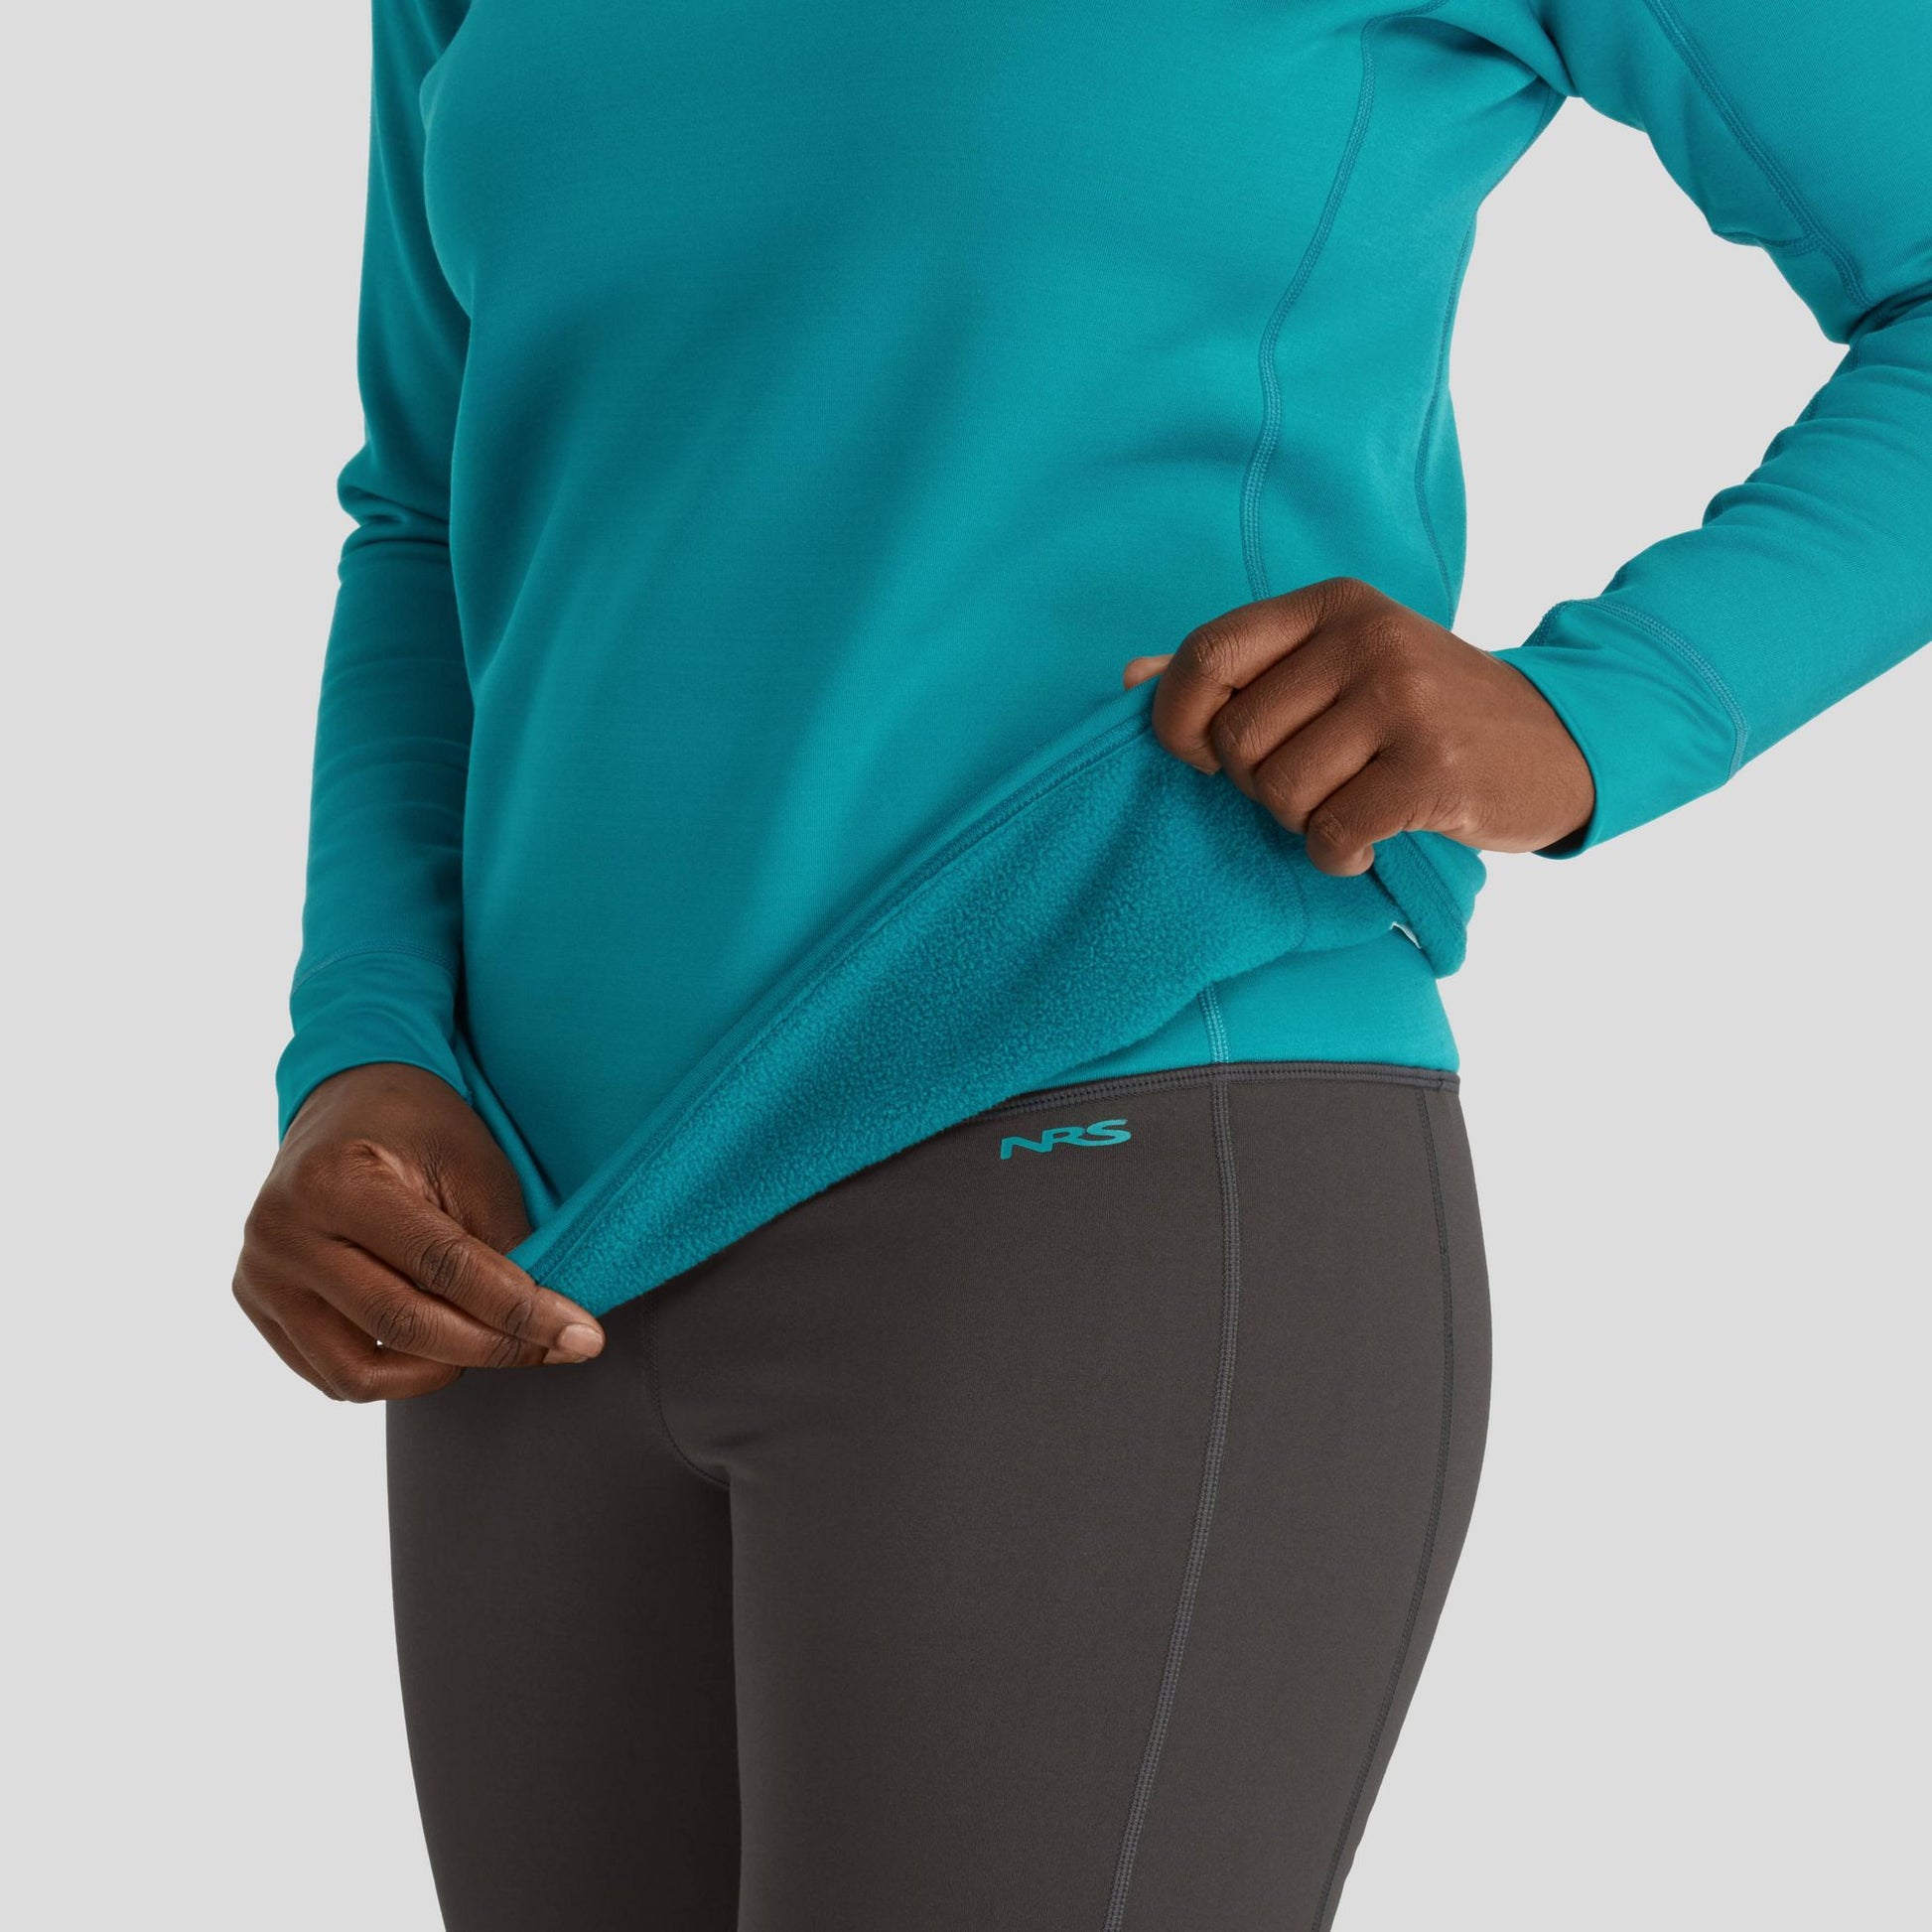 A woman wearing a teal, long-sleeved NRS Expedition Weight Shirt - Women's.